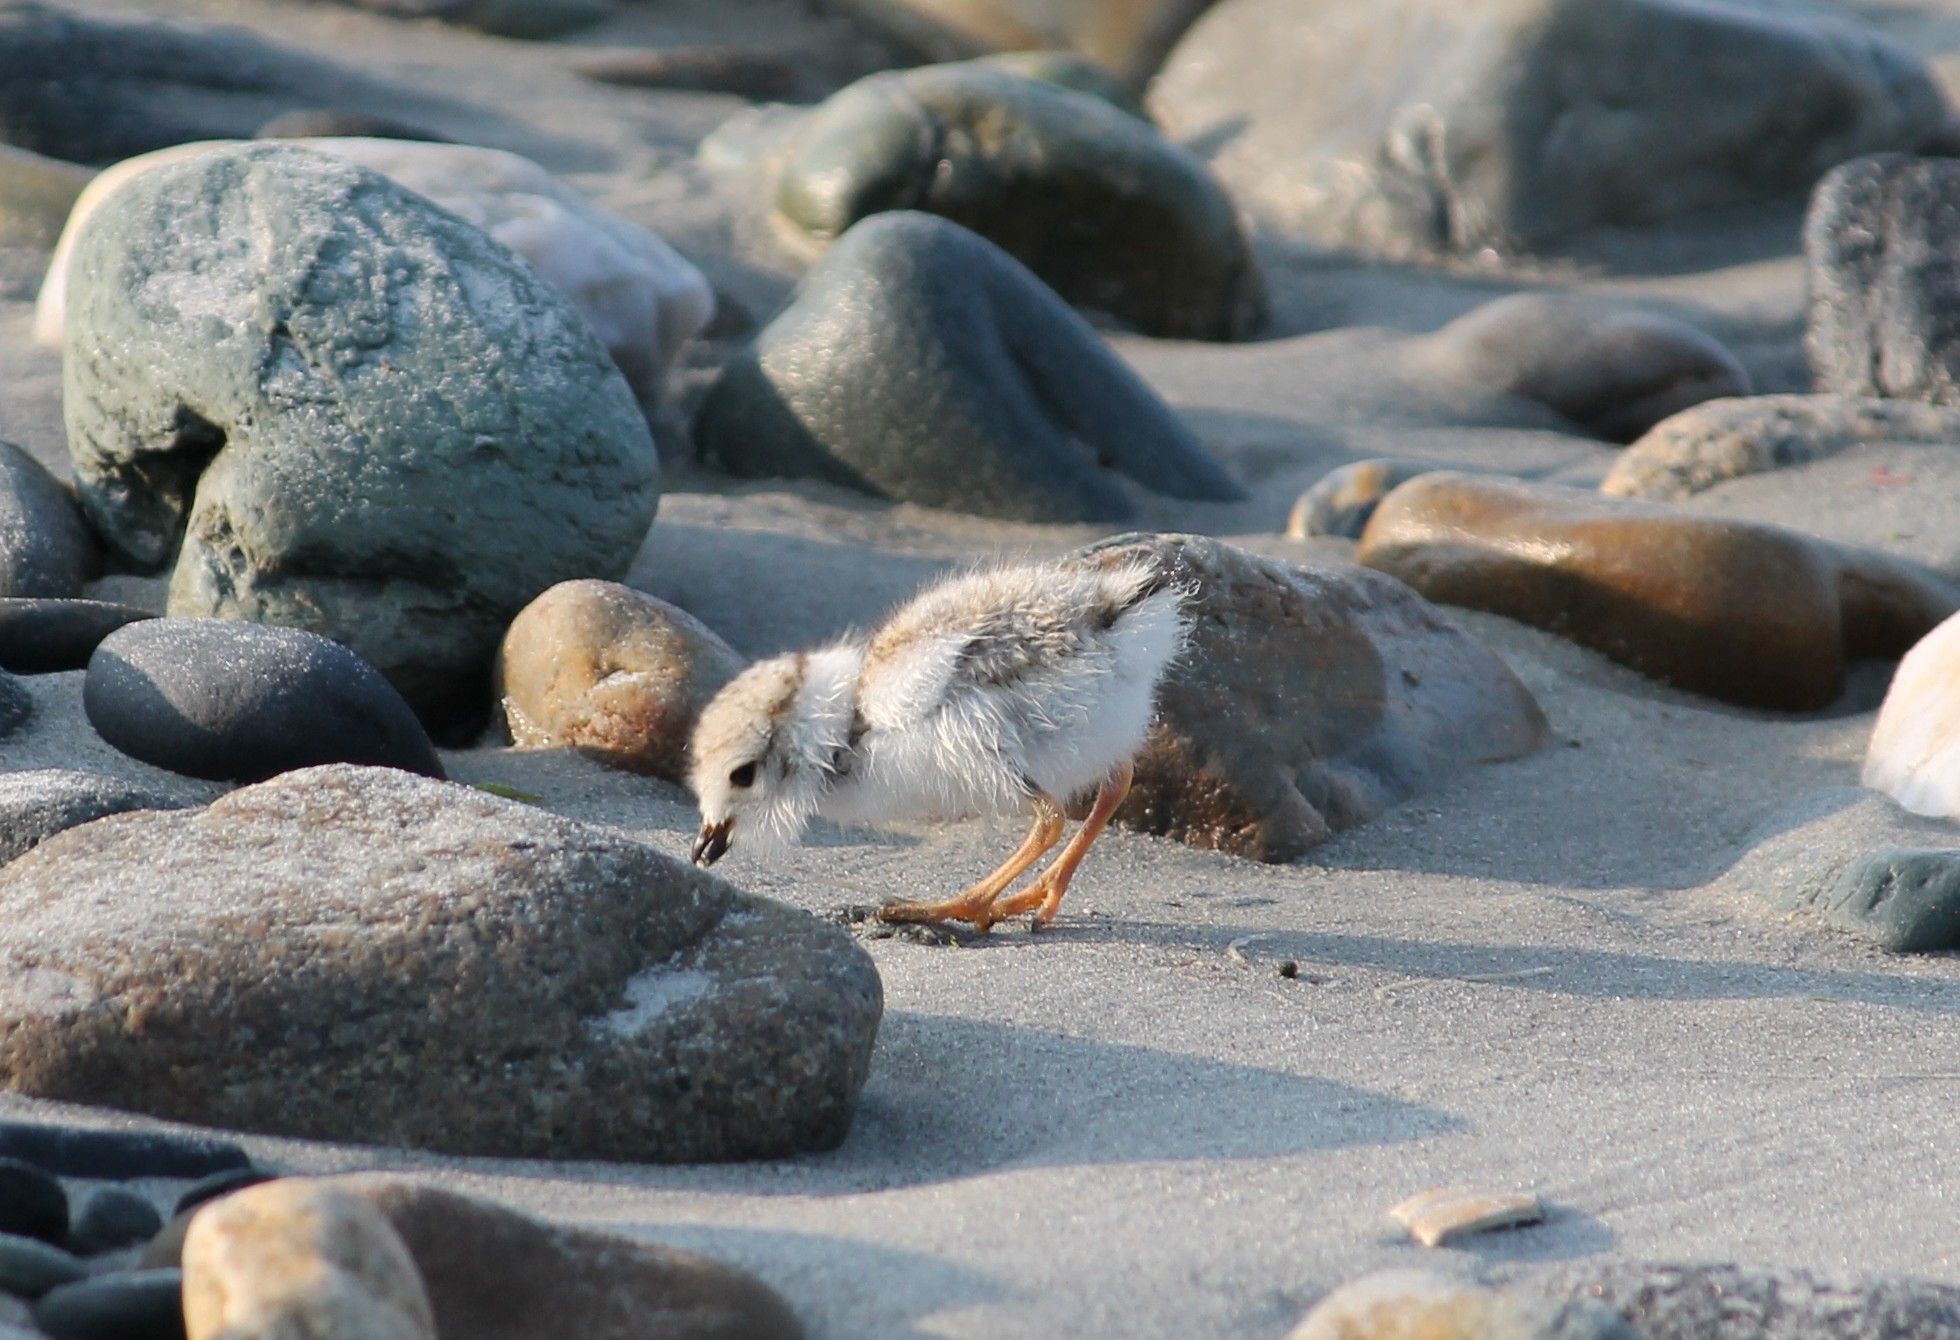 A small chick surrounded by rocks on a beach